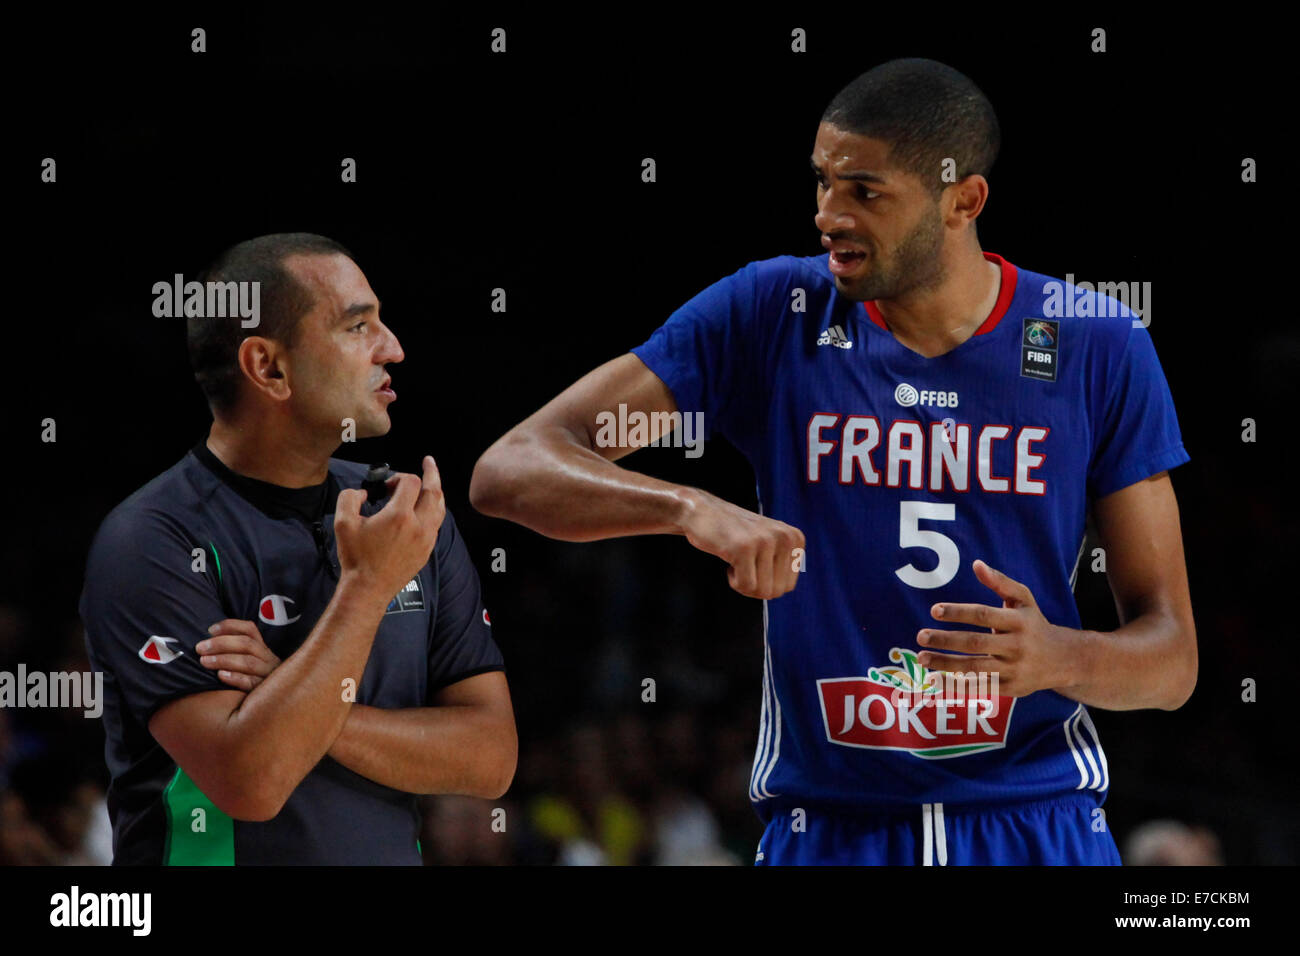 Madrid, Spain. 13th Sep, 2014. Nicolas Batum (R) of France argues with the referee during the third-place match against Lithuania at the 2014 FIBA Basketball World Cup, in Madrid, Spain, on Sept. 13, 2014. France won 95-93. © Victor Blanco/Xinhua/Alamy Live News Stock Photo